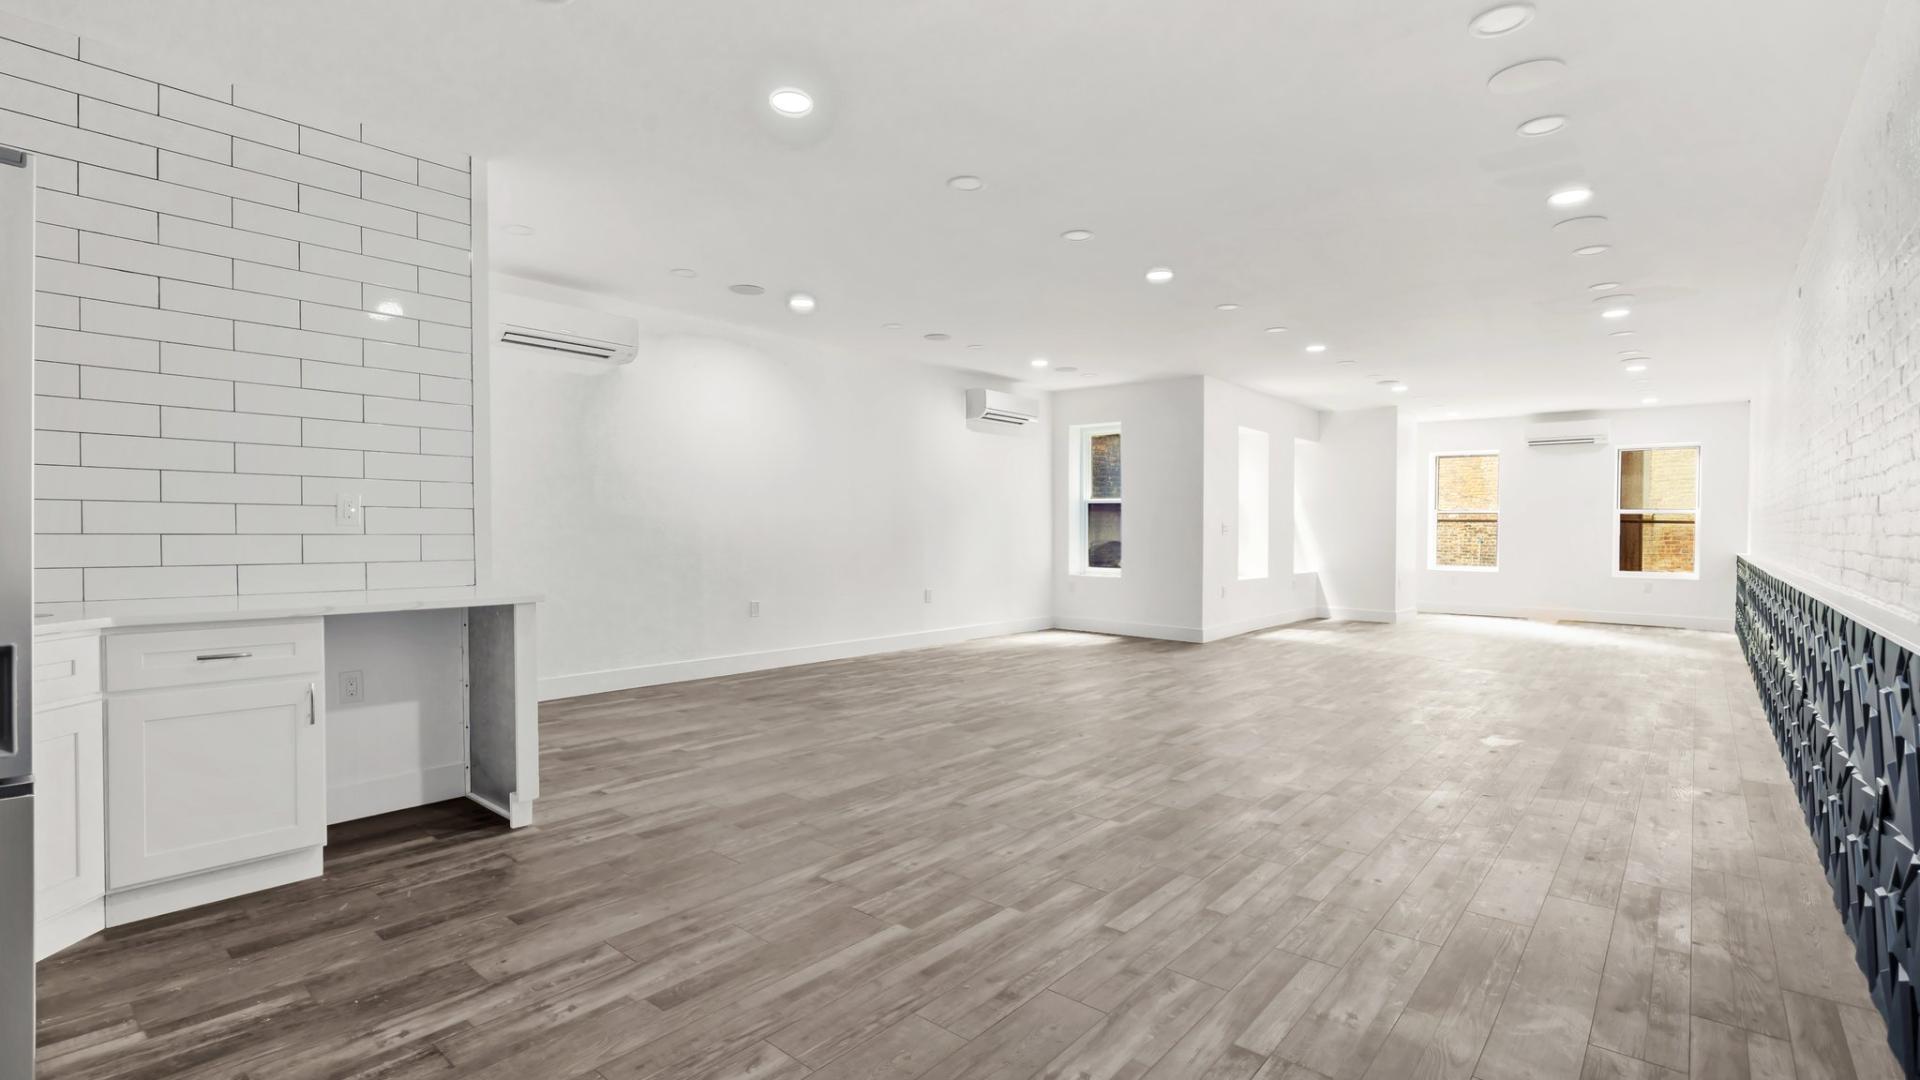 Event Spaces for Rent in East Village, NY